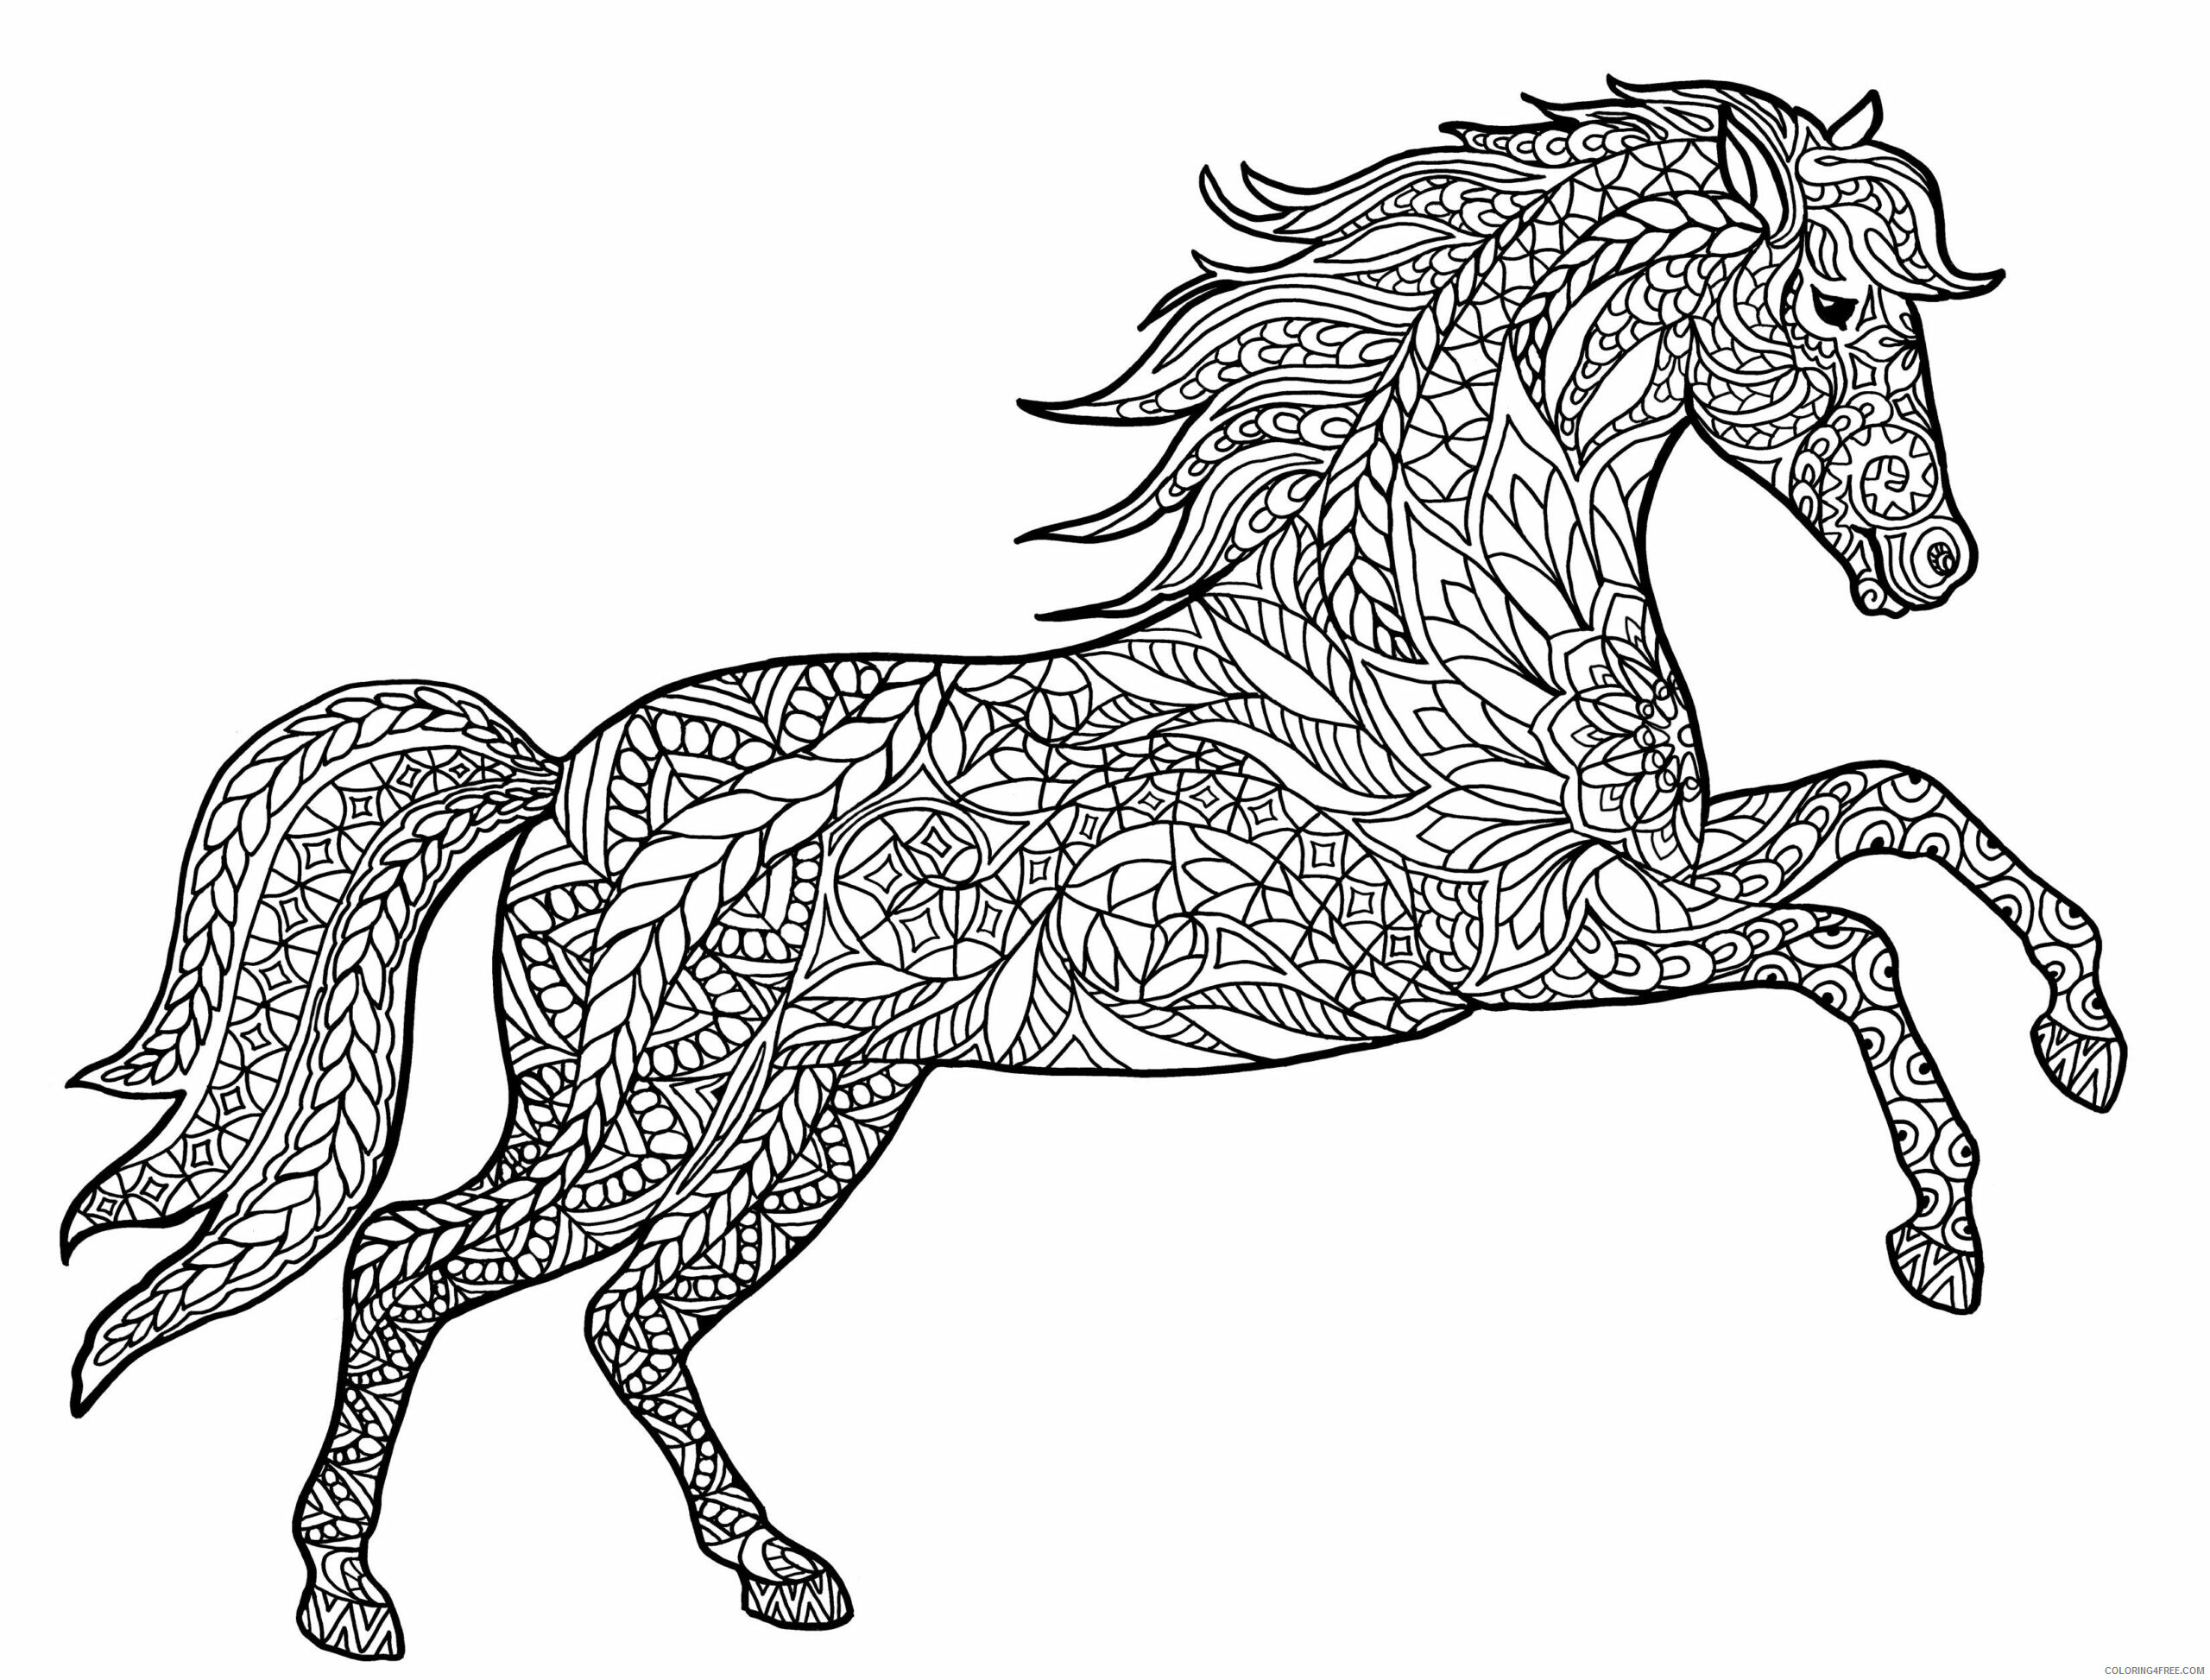 Mandala Coloring Pages Adult daring horse for adults Printable 2020 509 Coloring4free